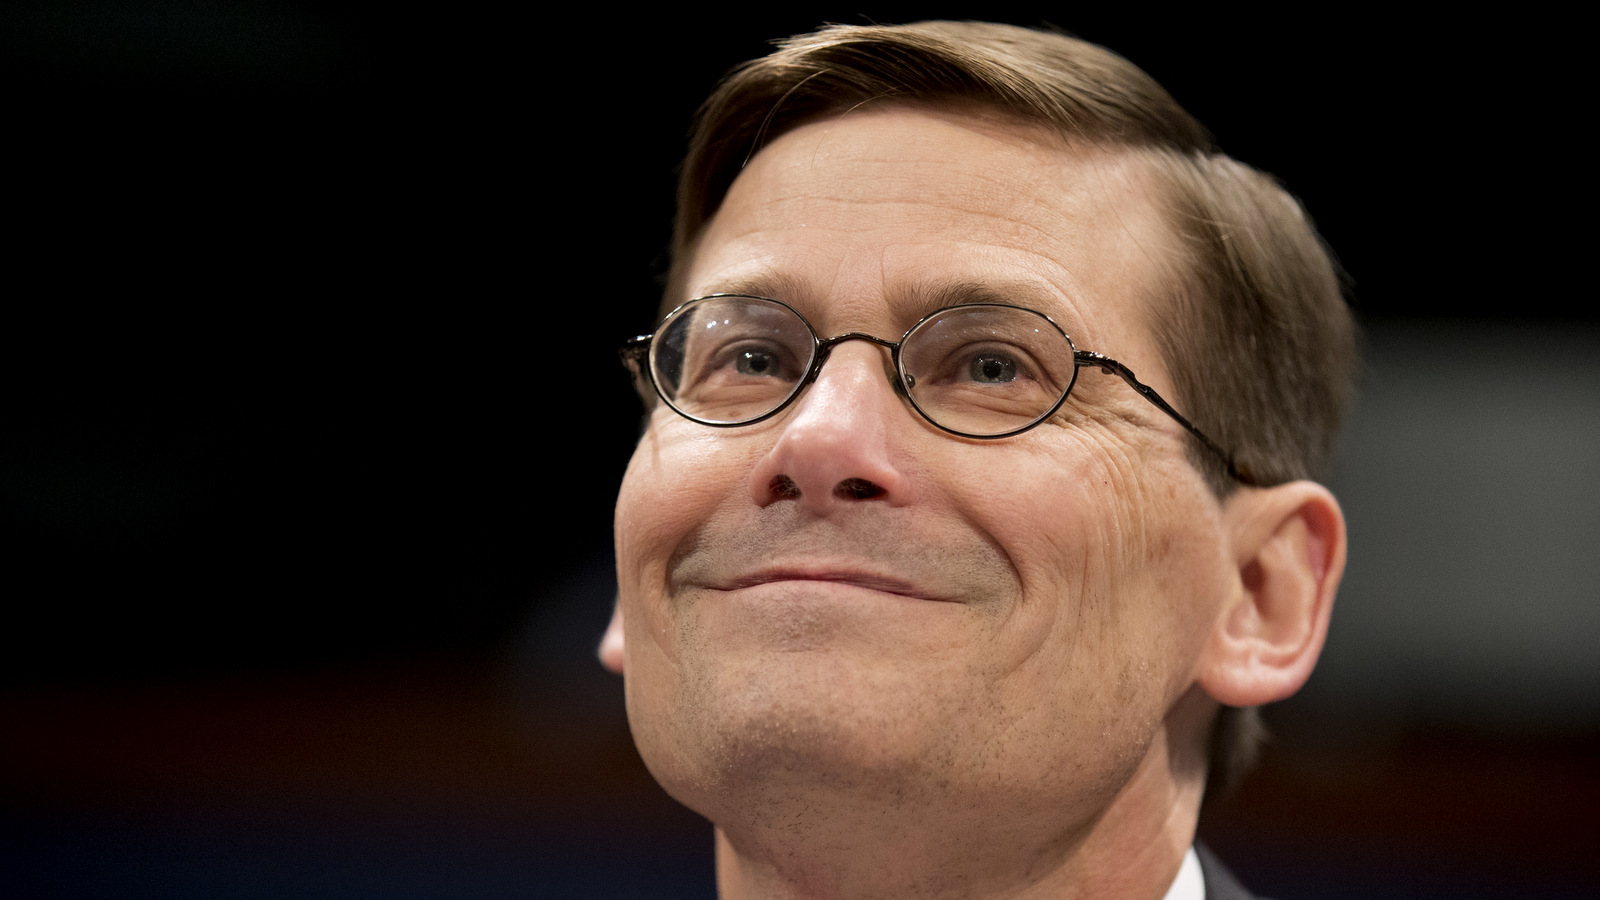 Former CIA Deputy Director Michael Morell, testifies before the House Permanent Select Committee on Intelligence on Capitol Hill in Washington, April 2, 2014, about the terrorist attacks on U.S. facilities in Benghazi. (AP/Manuel Balce Ceneta)